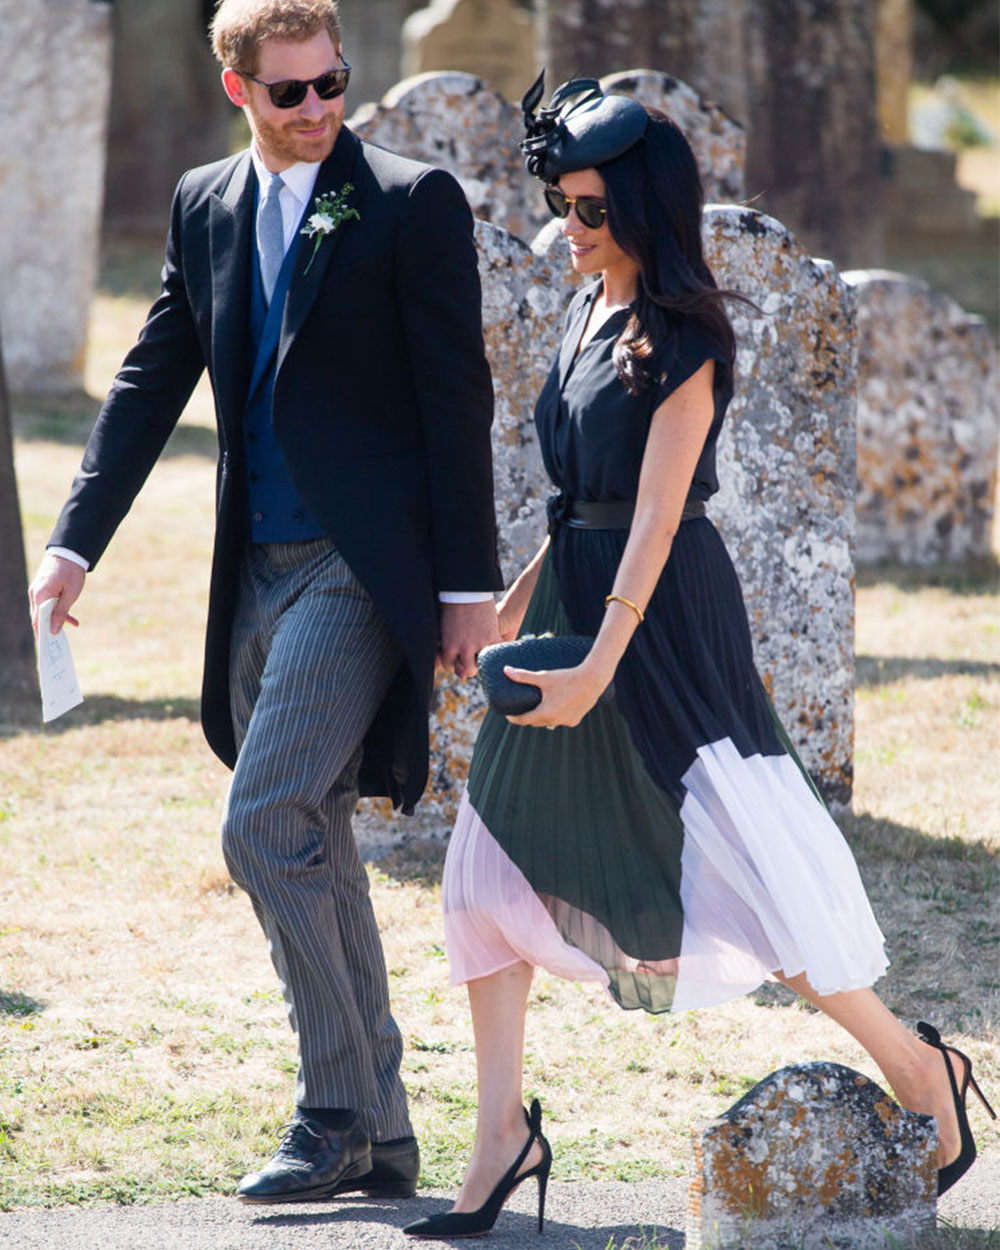 August 4, 2018: No boatneck for the birthday girl, today! Meghan, Duchess of Sussex sees in her 37th year by attending the wedding of Prince Harry’s childhood friend wearing a dress by Club Monaco featuring a colour-blocked skirt, cap sleeve and button-up silhouette. Meghan accessorised with a black snakeskin clutch, go-to Aquazzura heels and a black Phillip Treacy fascinator.